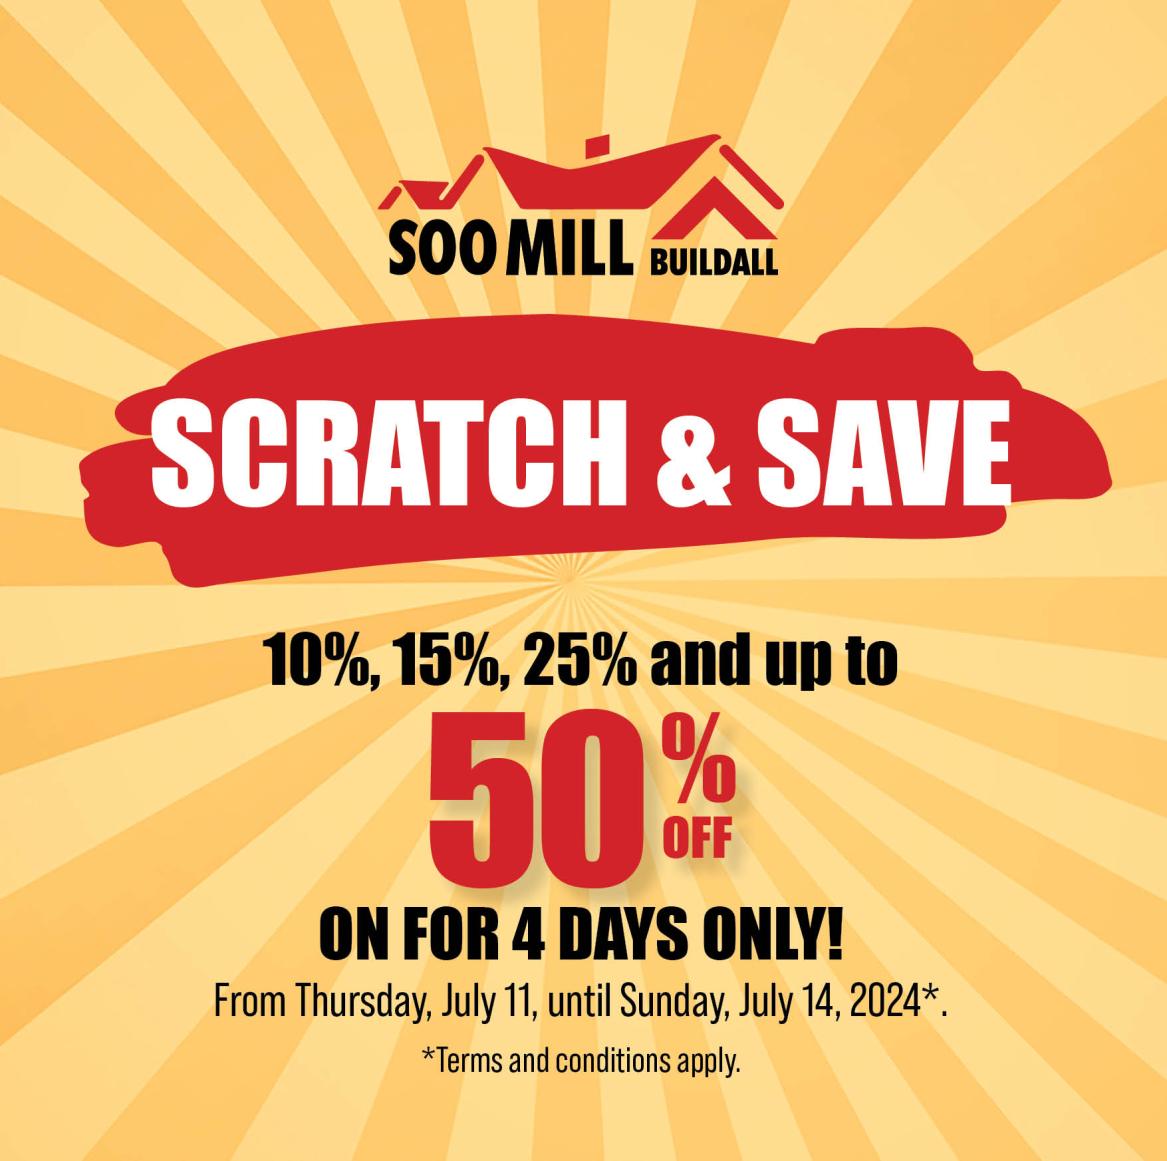 SCRATCH & SAVE is back at Soo Mill! 